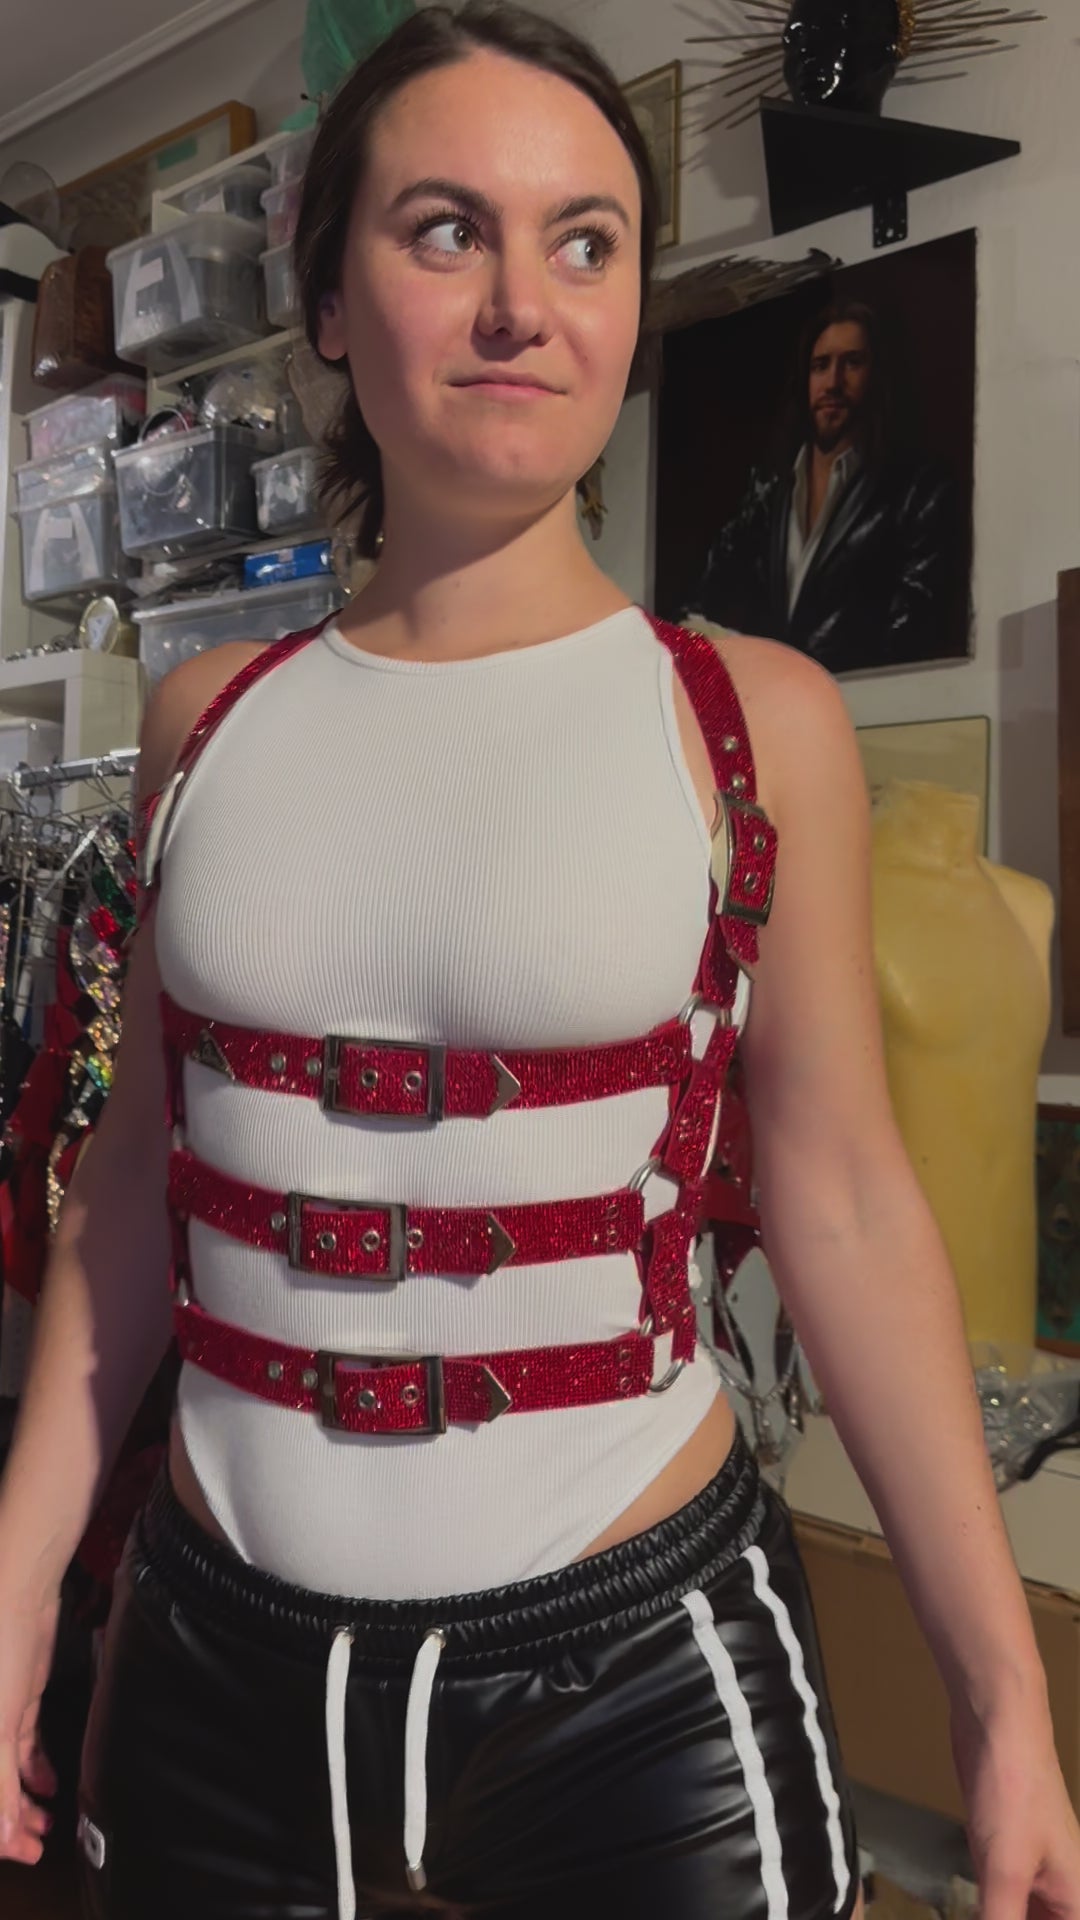 The video shows a beautiful women trying on the red sparkly cage harness at the atelier of the upcoming fashion brand Lorand Lajos